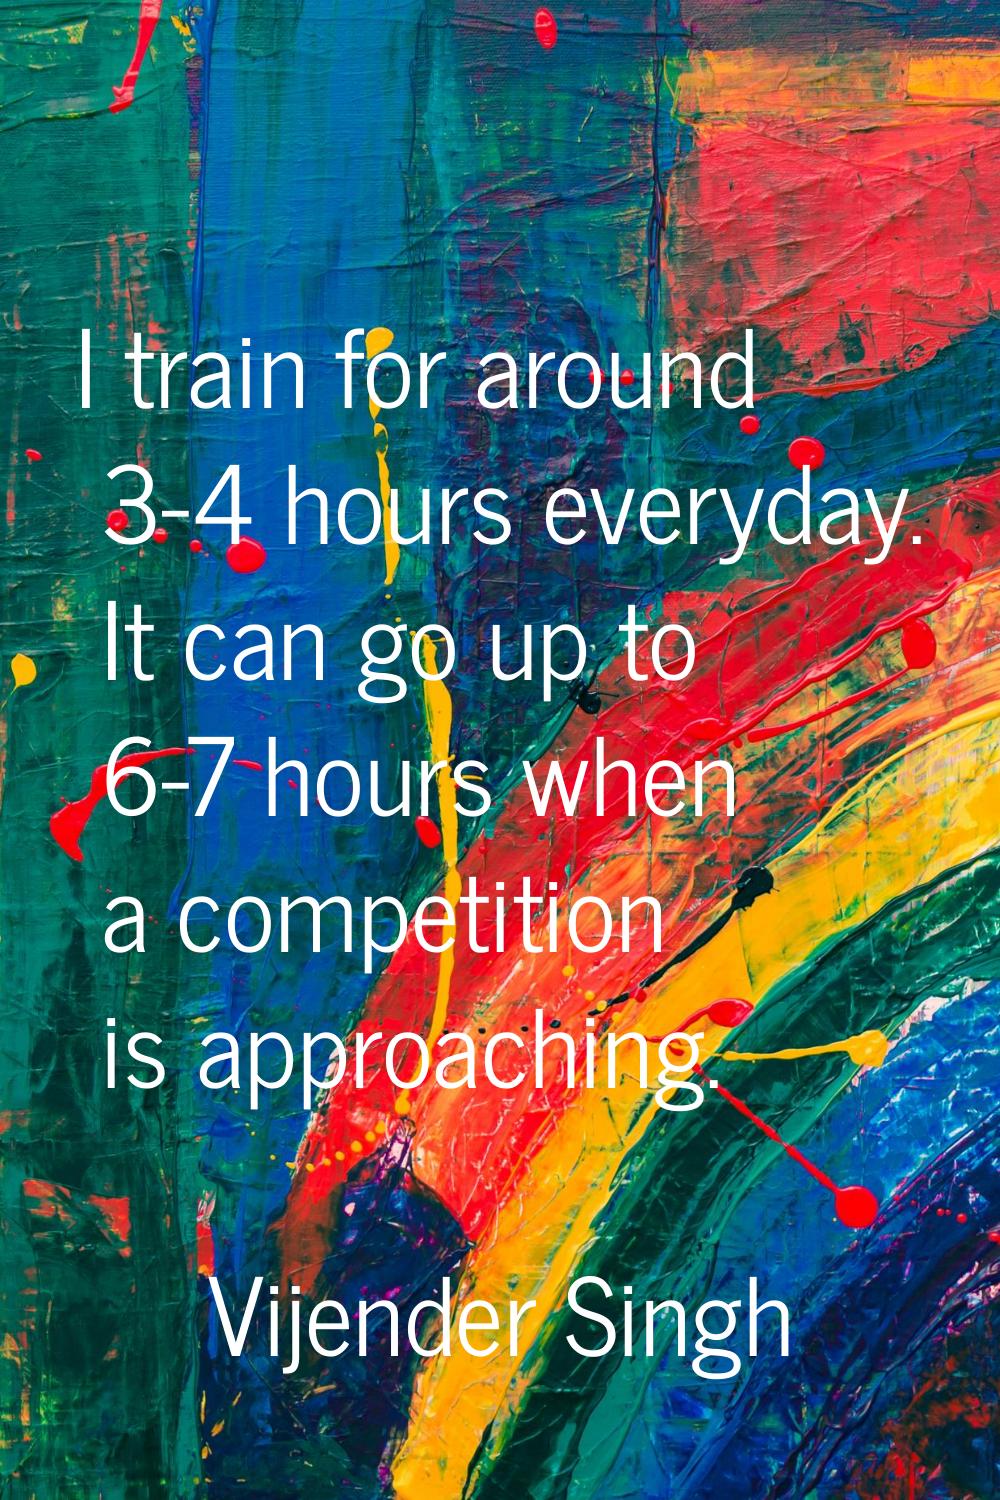 I train for around 3-4 hours everyday. It can go up to 6-7 hours when a competition is approaching.